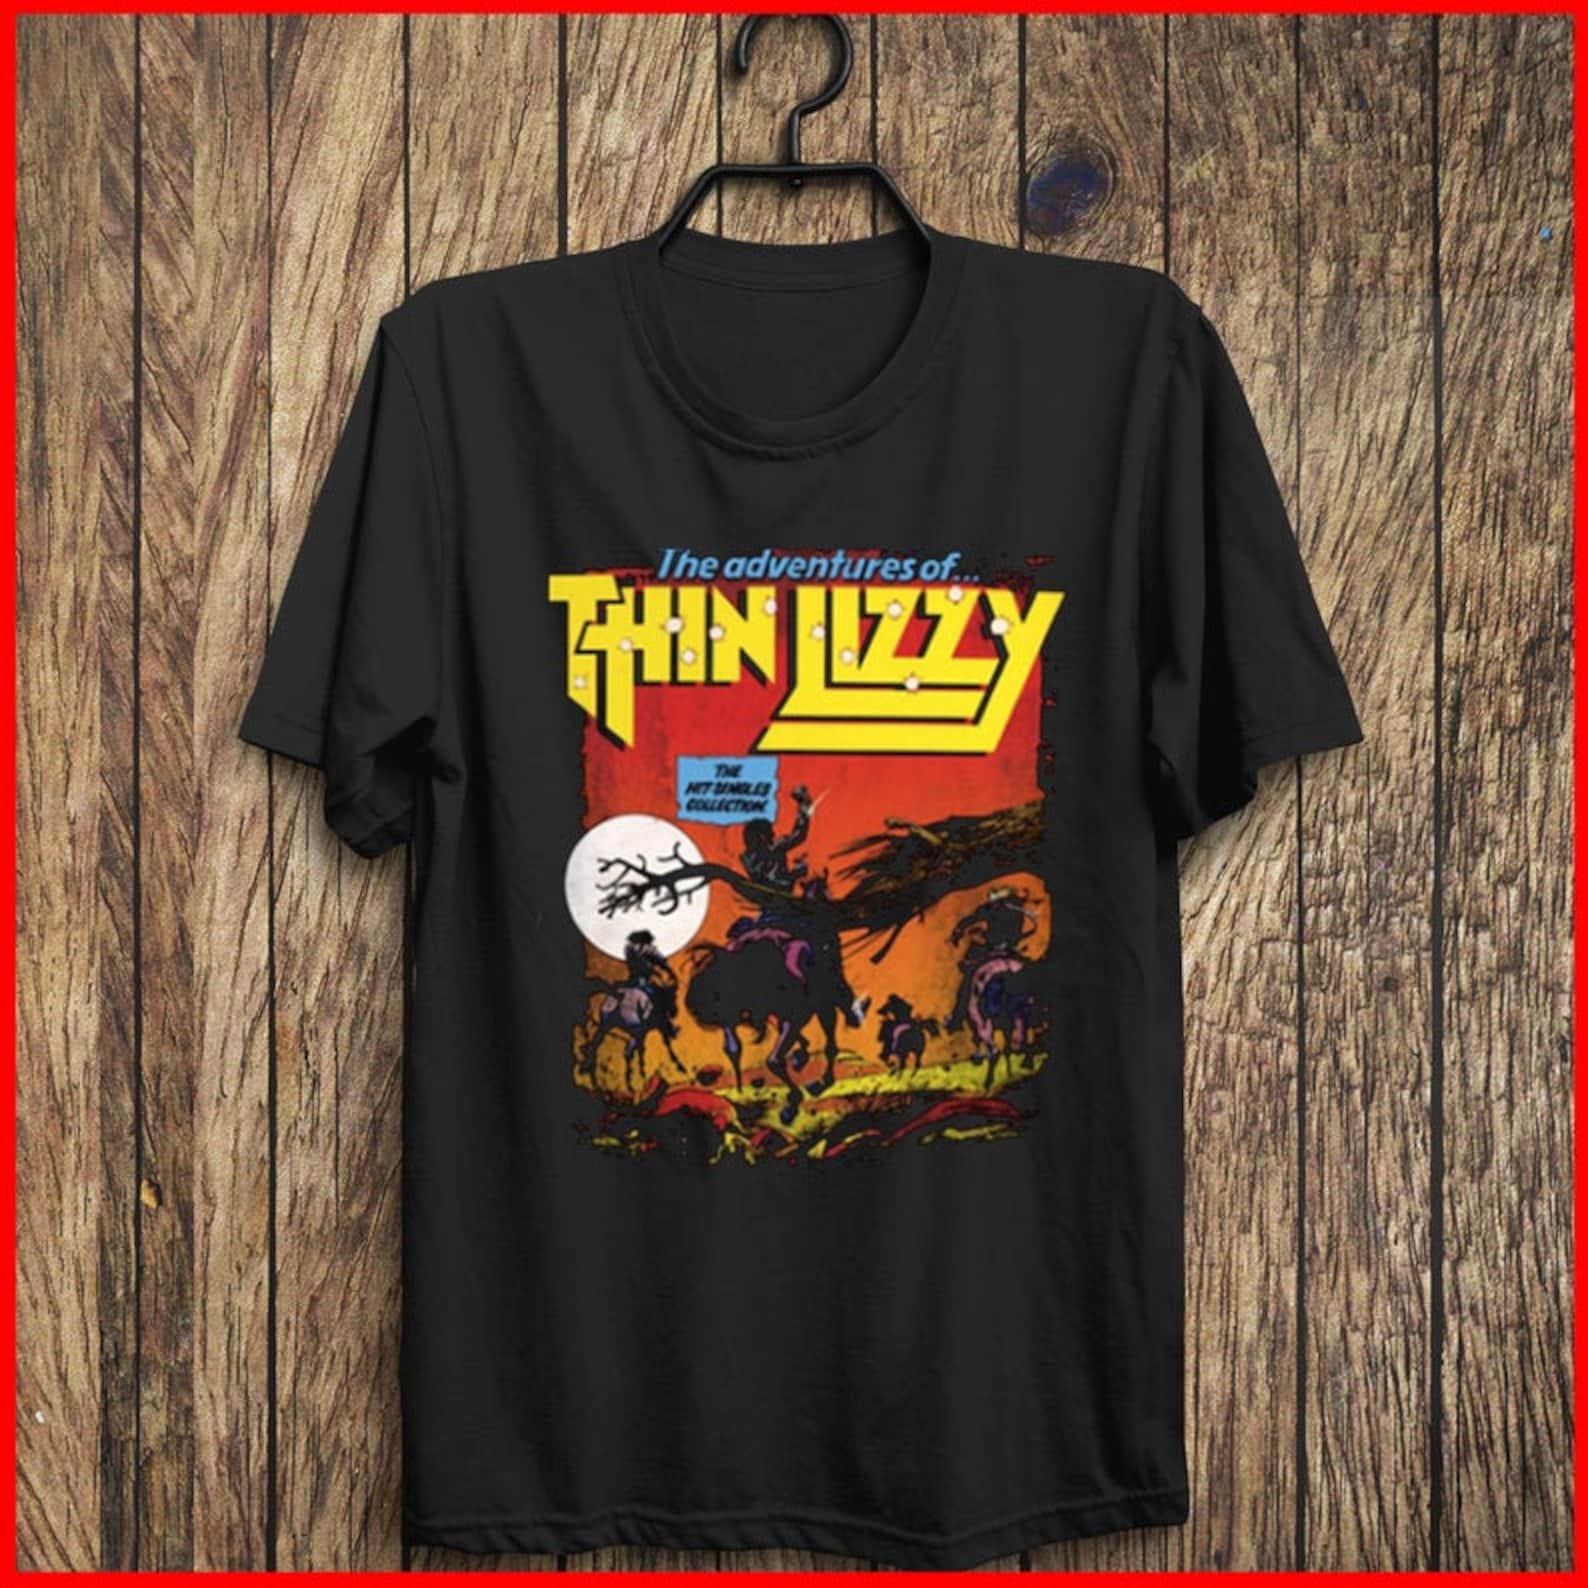 Thin Lizzy Adventures T Shirt Rock Metal Band Tee Artist | Etsy